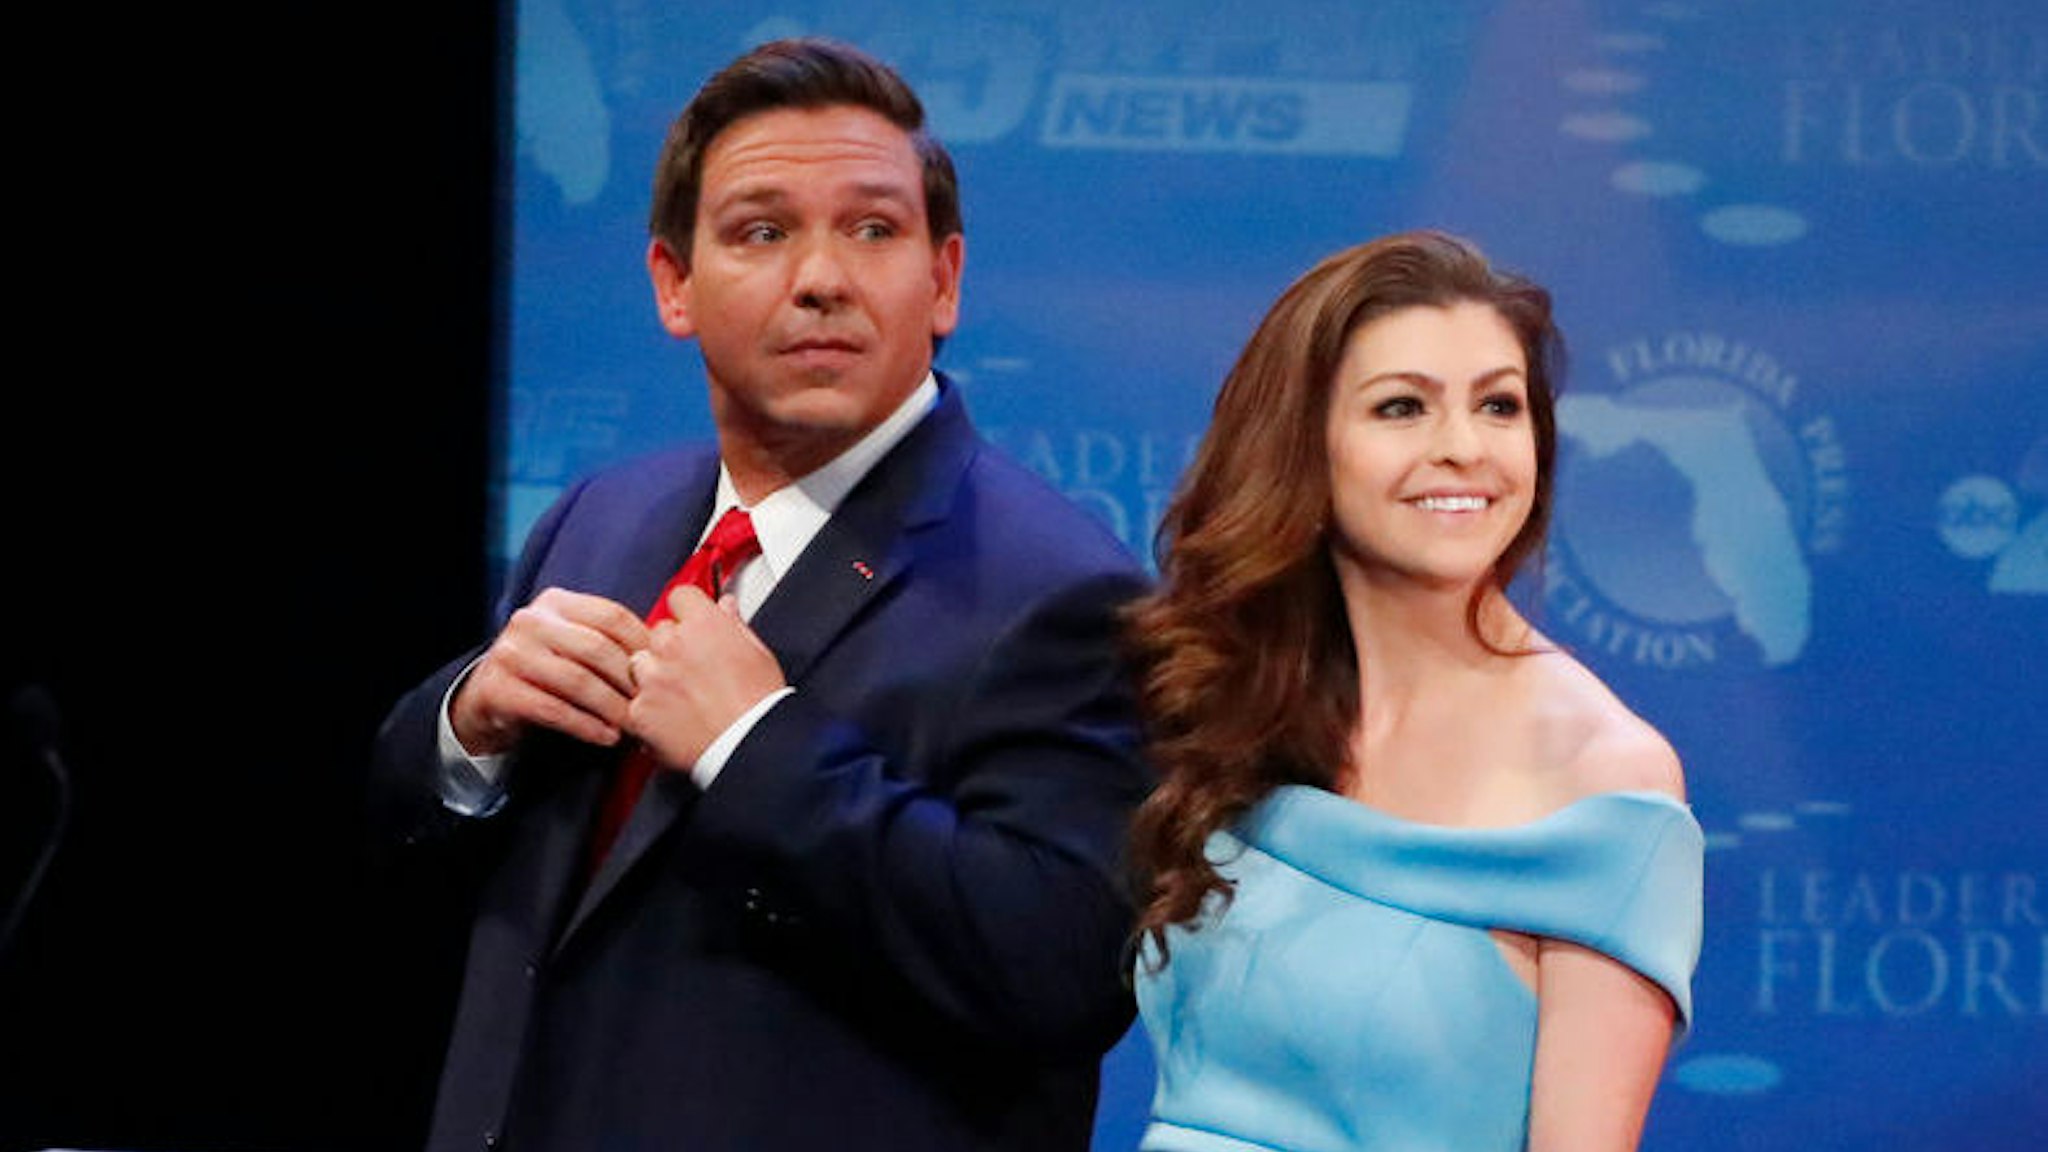 Republican Ron DeSantis and his wife Casey leave the stage after a debate with Democrat Andrew Gillum at Broward College October 24, 2018 in Davie, Florida.